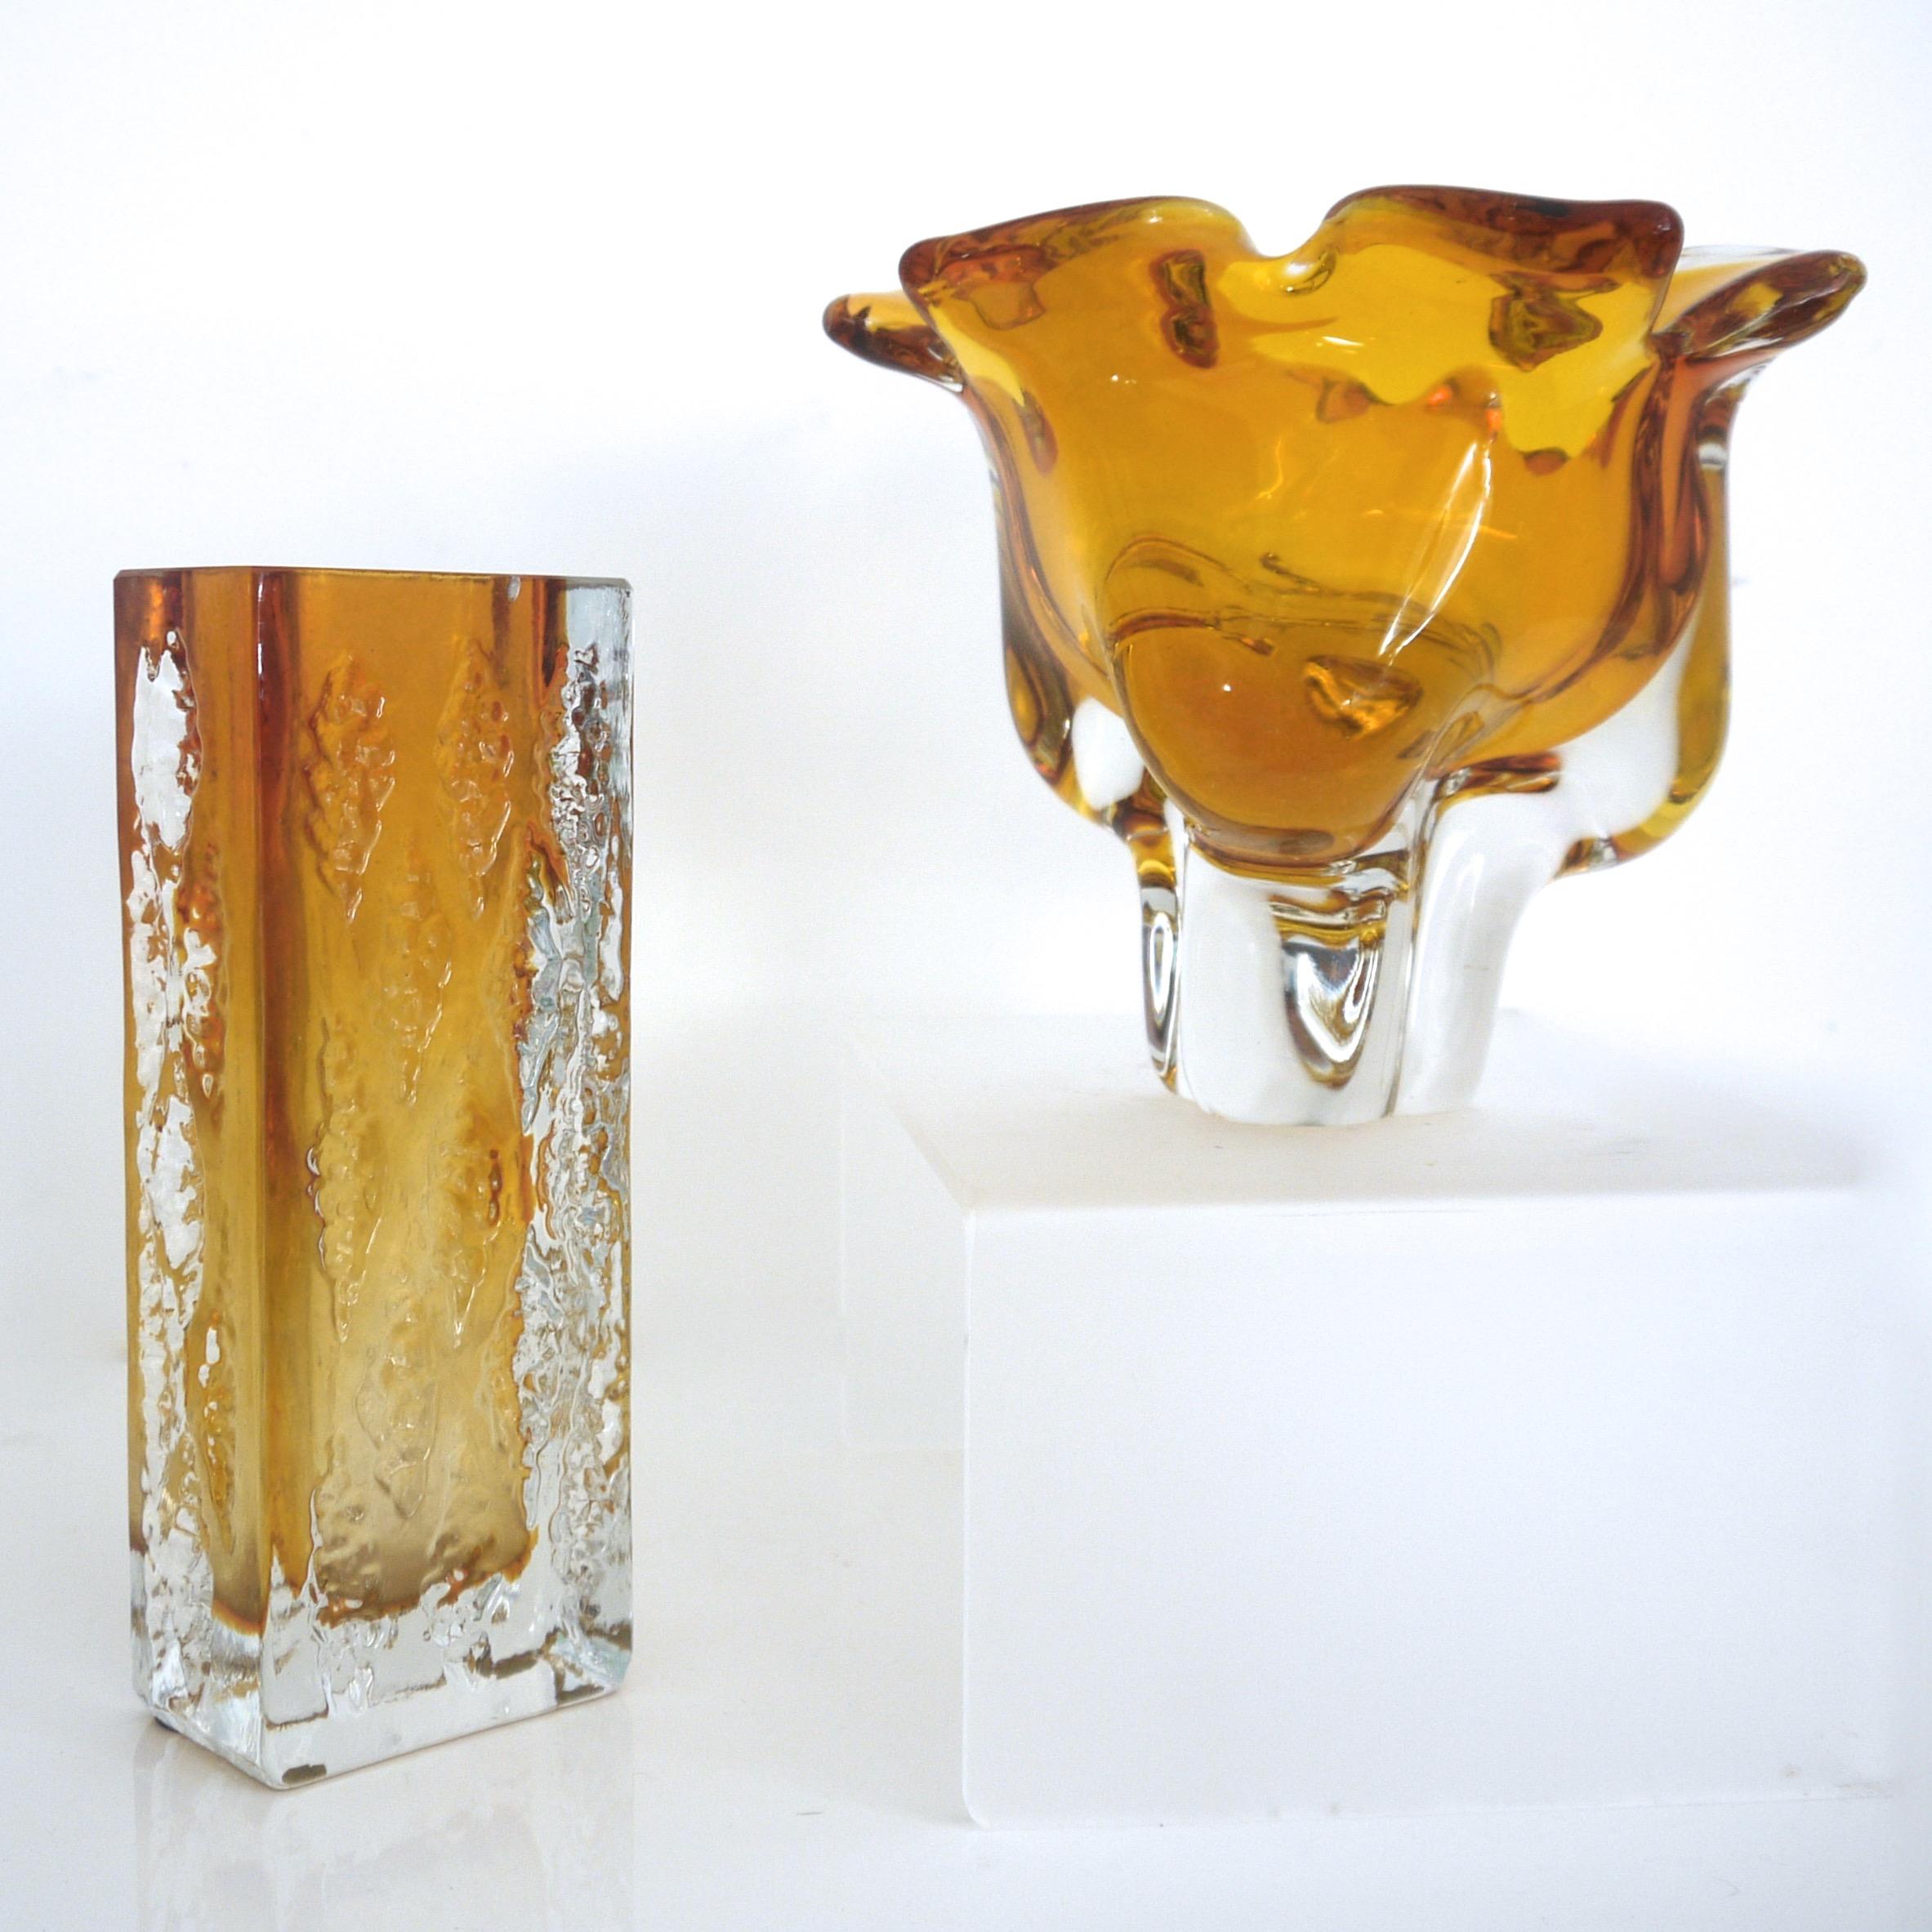 The Chribska glassworks was founded in the early 15th century, and stayed in production until very recently. In 1882. Chribska became part of the Borske Sklo National Corporation during the 1950s. Chief designer at this time was Josef Hospodka, who